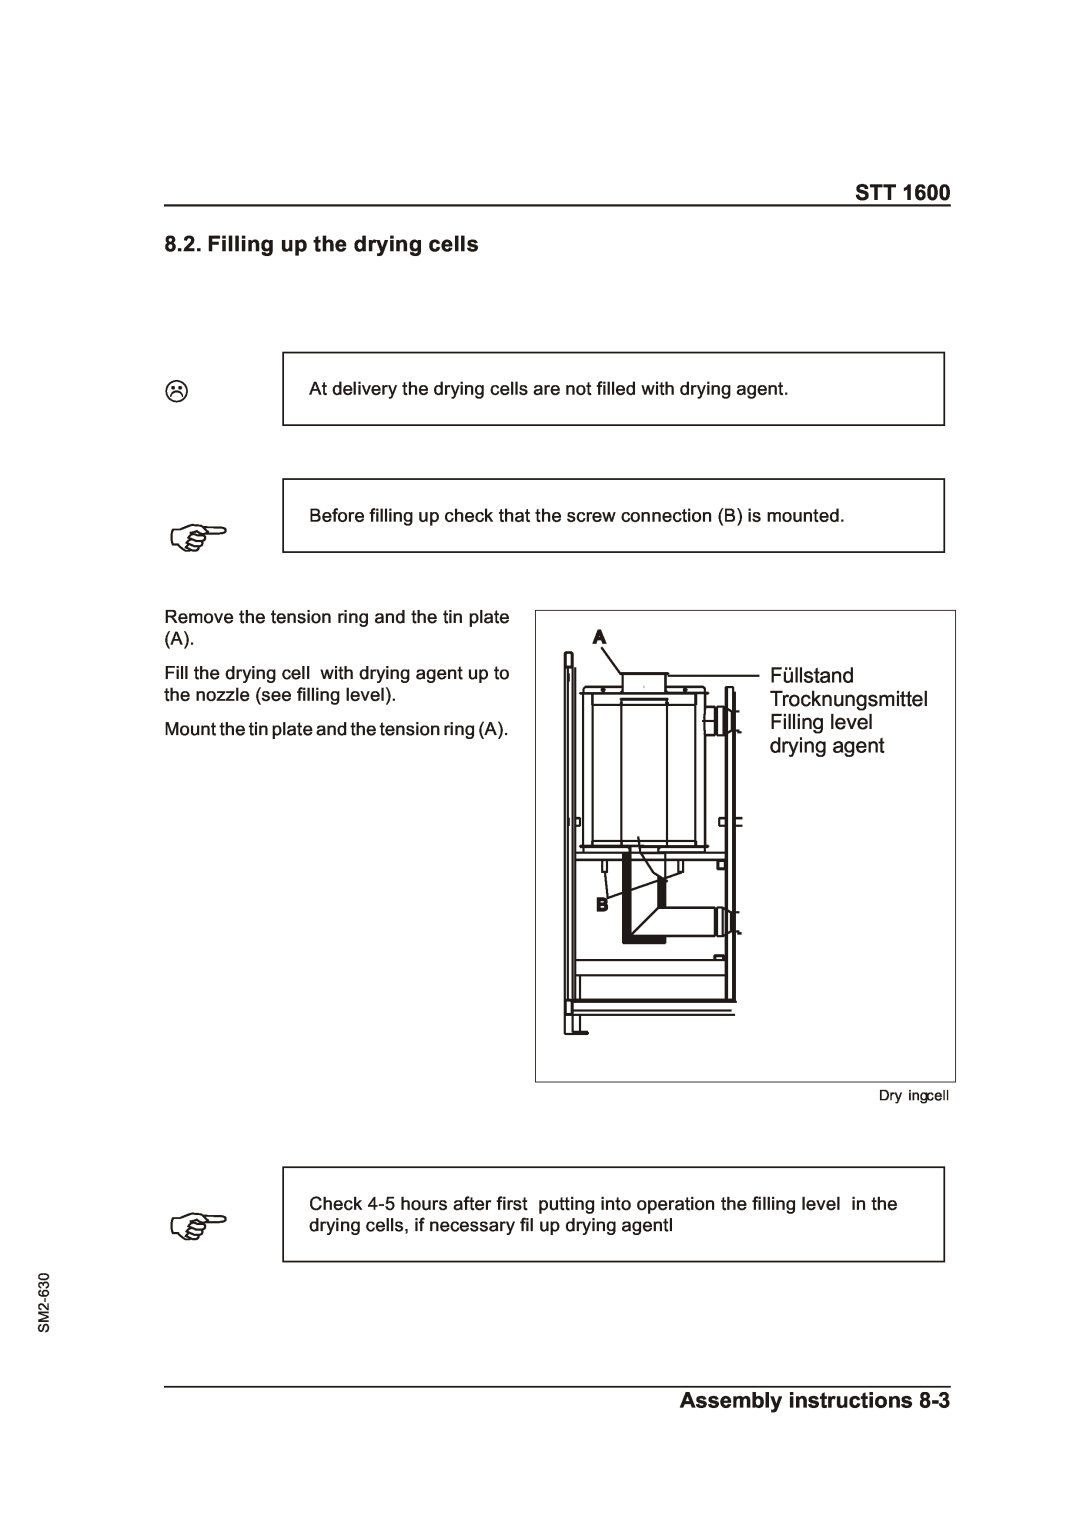 Sterling STT 1600 operating instructions STT 8.2. Filling up the drying cells, Assembly instructions 